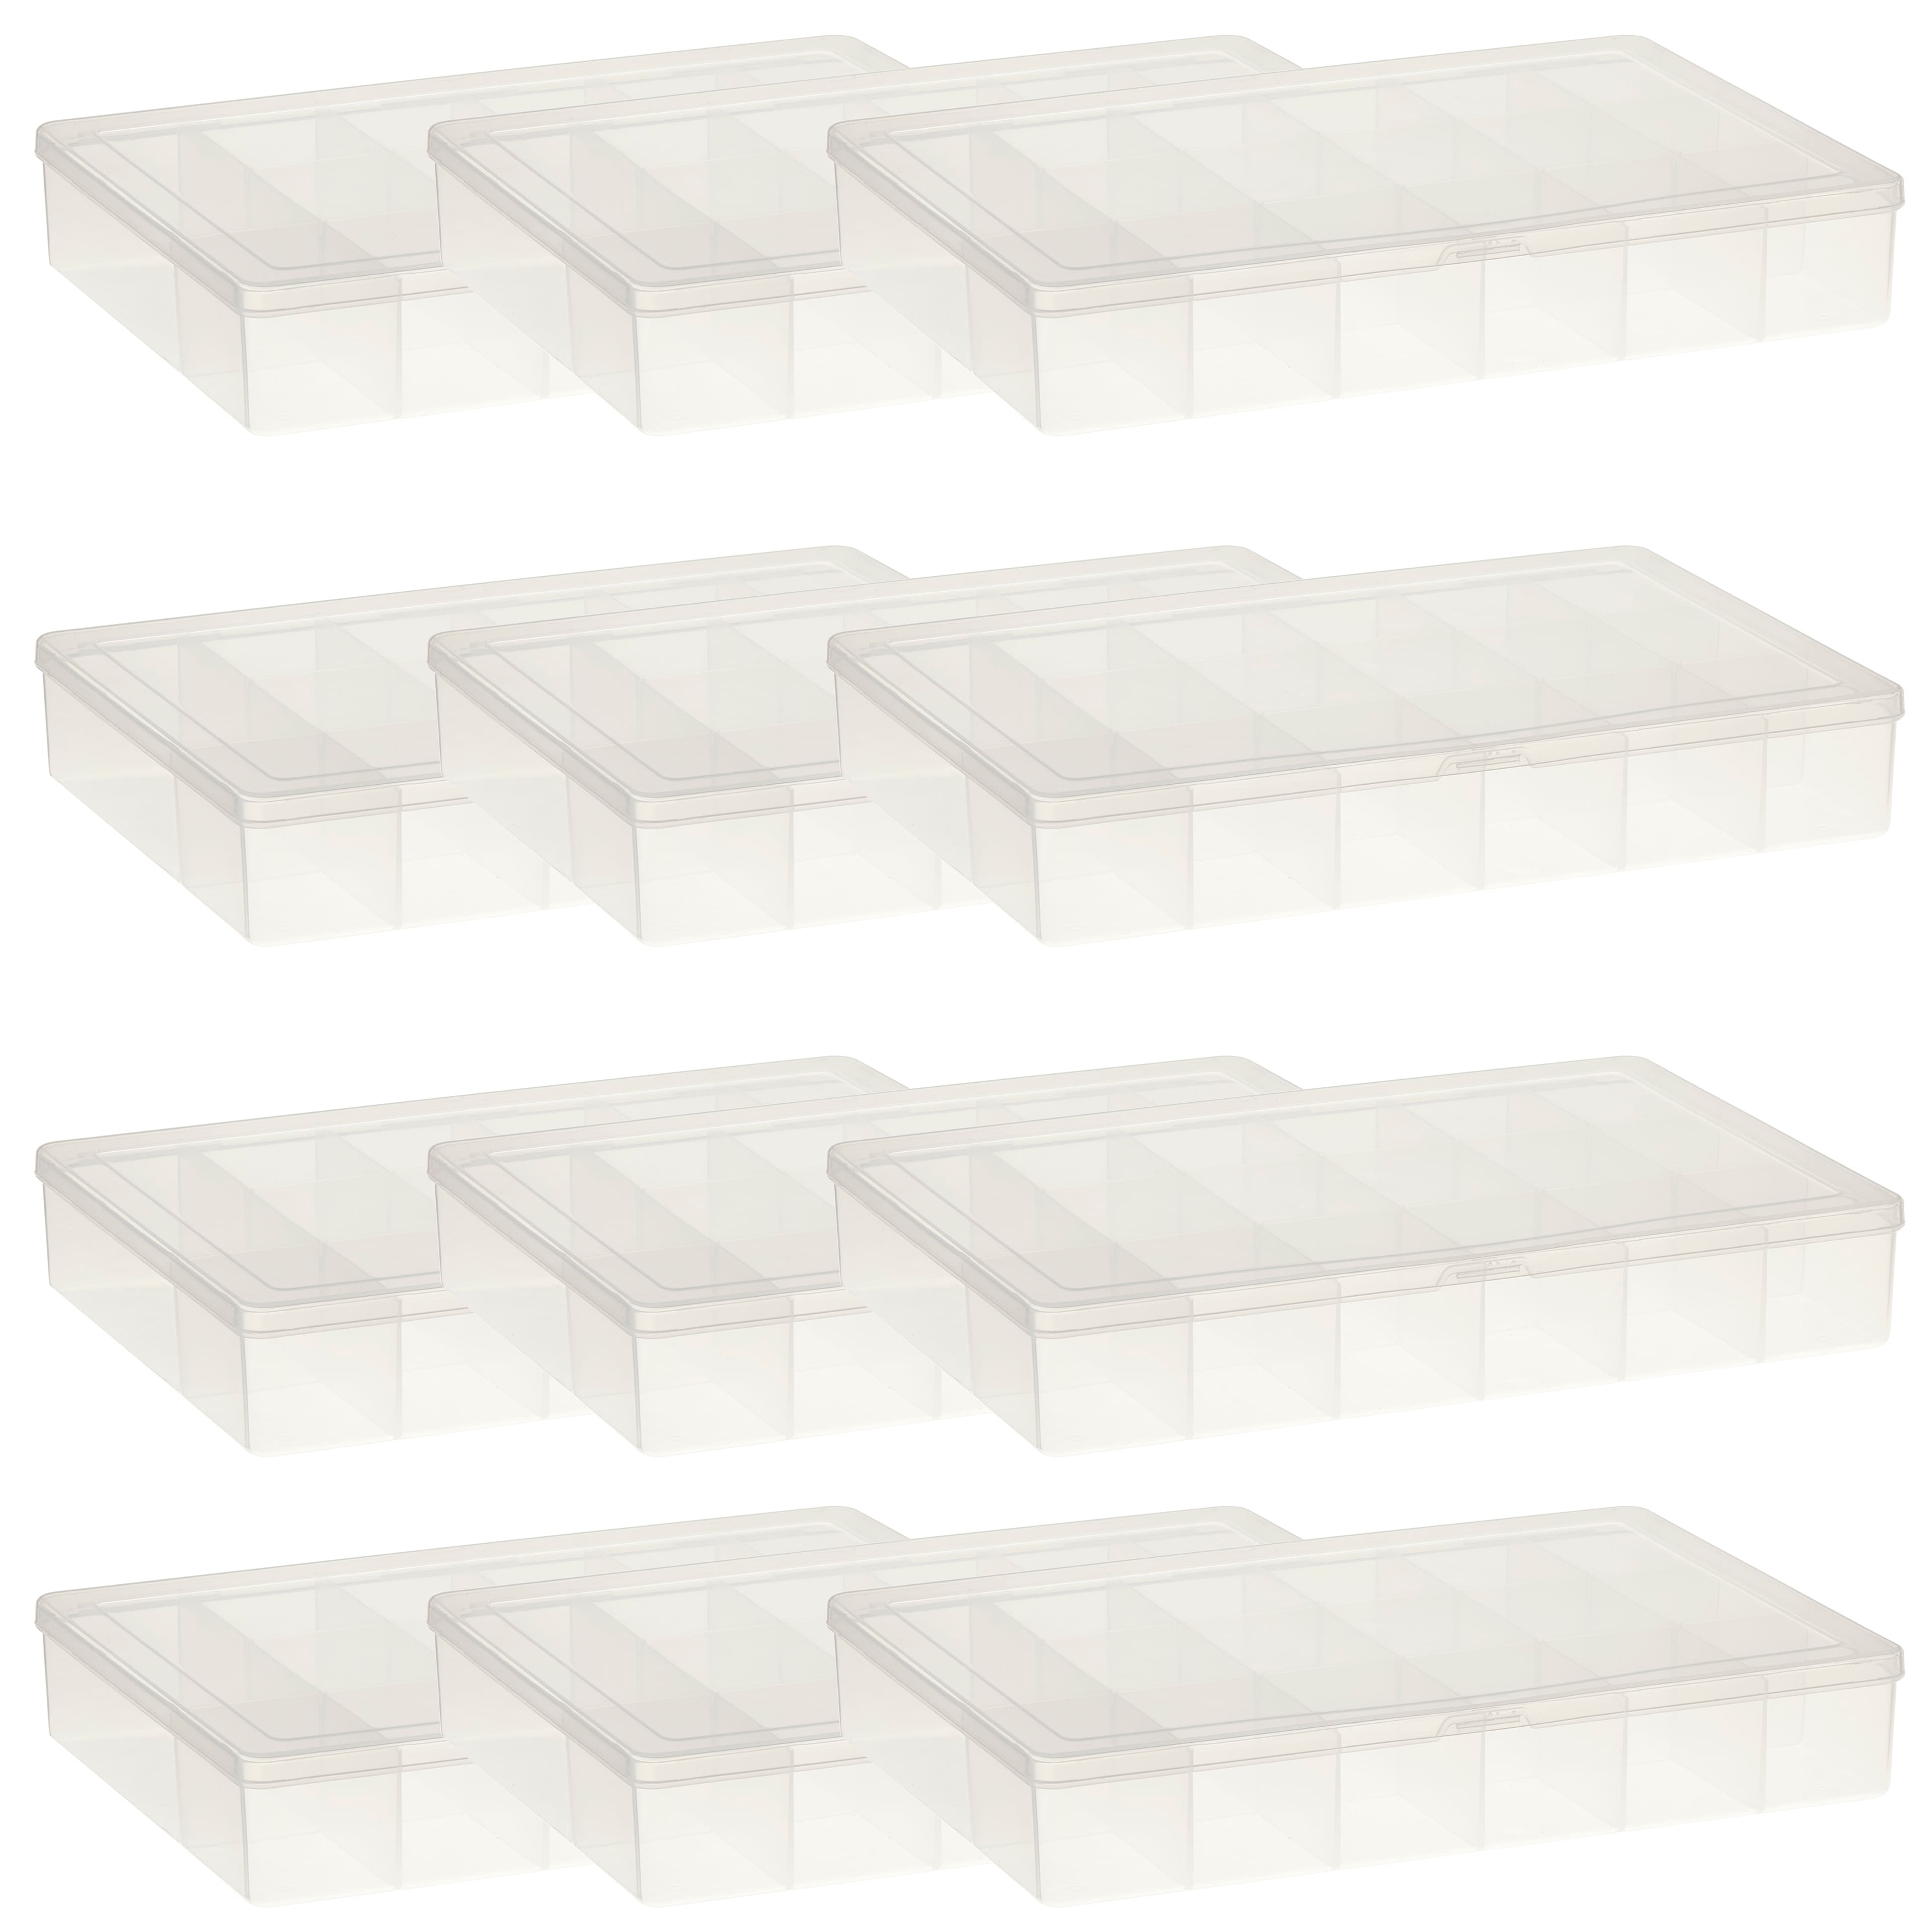 Wholesale 12 Compartments Rectangle Plastic Bead Storage Containers 